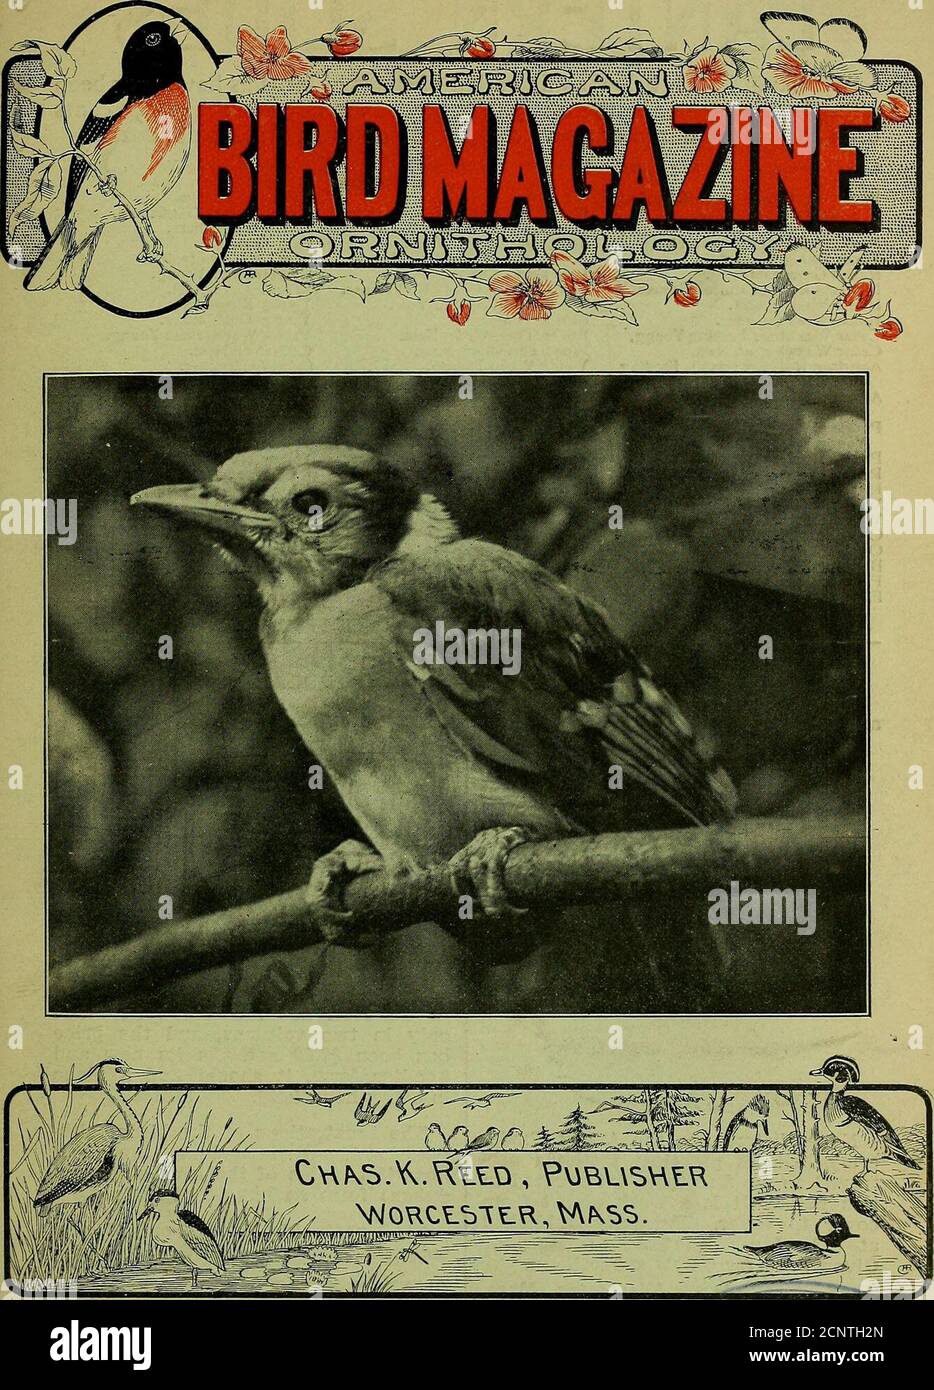 . American bird magazine, ornithology . ;A^ Vol. 6, No. 3. MARCH, 1906. 10c a copy, $1 a year.. Entered at the Post Office at Worcester, Mass., as second-class/OiatteF, Jan iWwOl. otm Mii$e«** LANTERN SLIDES We have listed below as fine a list of slides of birds as have ever beenoffered. Every one of them is photographed directly from life. 50 centseach, ^5.00 per dozen or finely colored, $1.00 each, ;^ 10.00 per dozen. Chippy Family (6 Chipping Spar-rows) . Preparing Breakfast (6 ChippingSparrows.) Woodcoclc on Nest. Nest and Eggs of Woodcock Three Young Woodcock. Ruffed Grouse on Nest. Nest Stock Photo